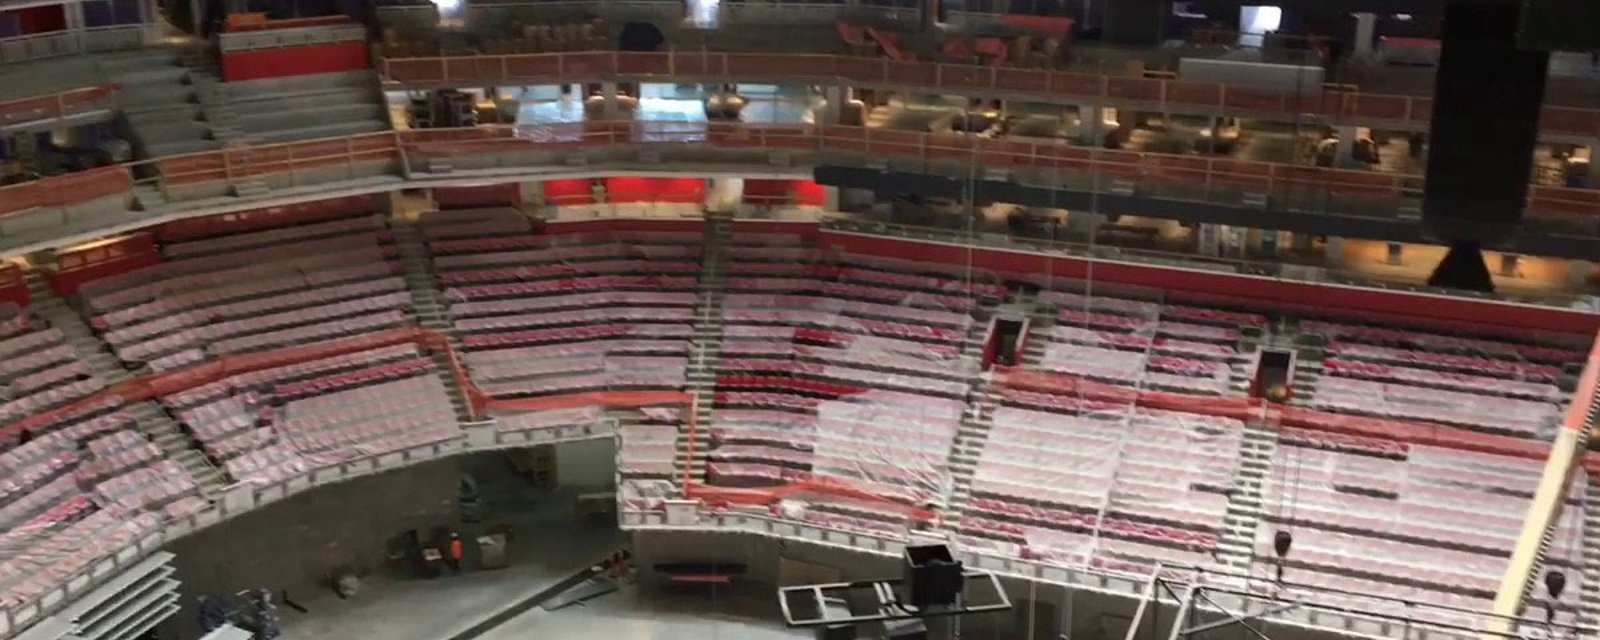 Must see: Little Caesars Arena is opened for business!